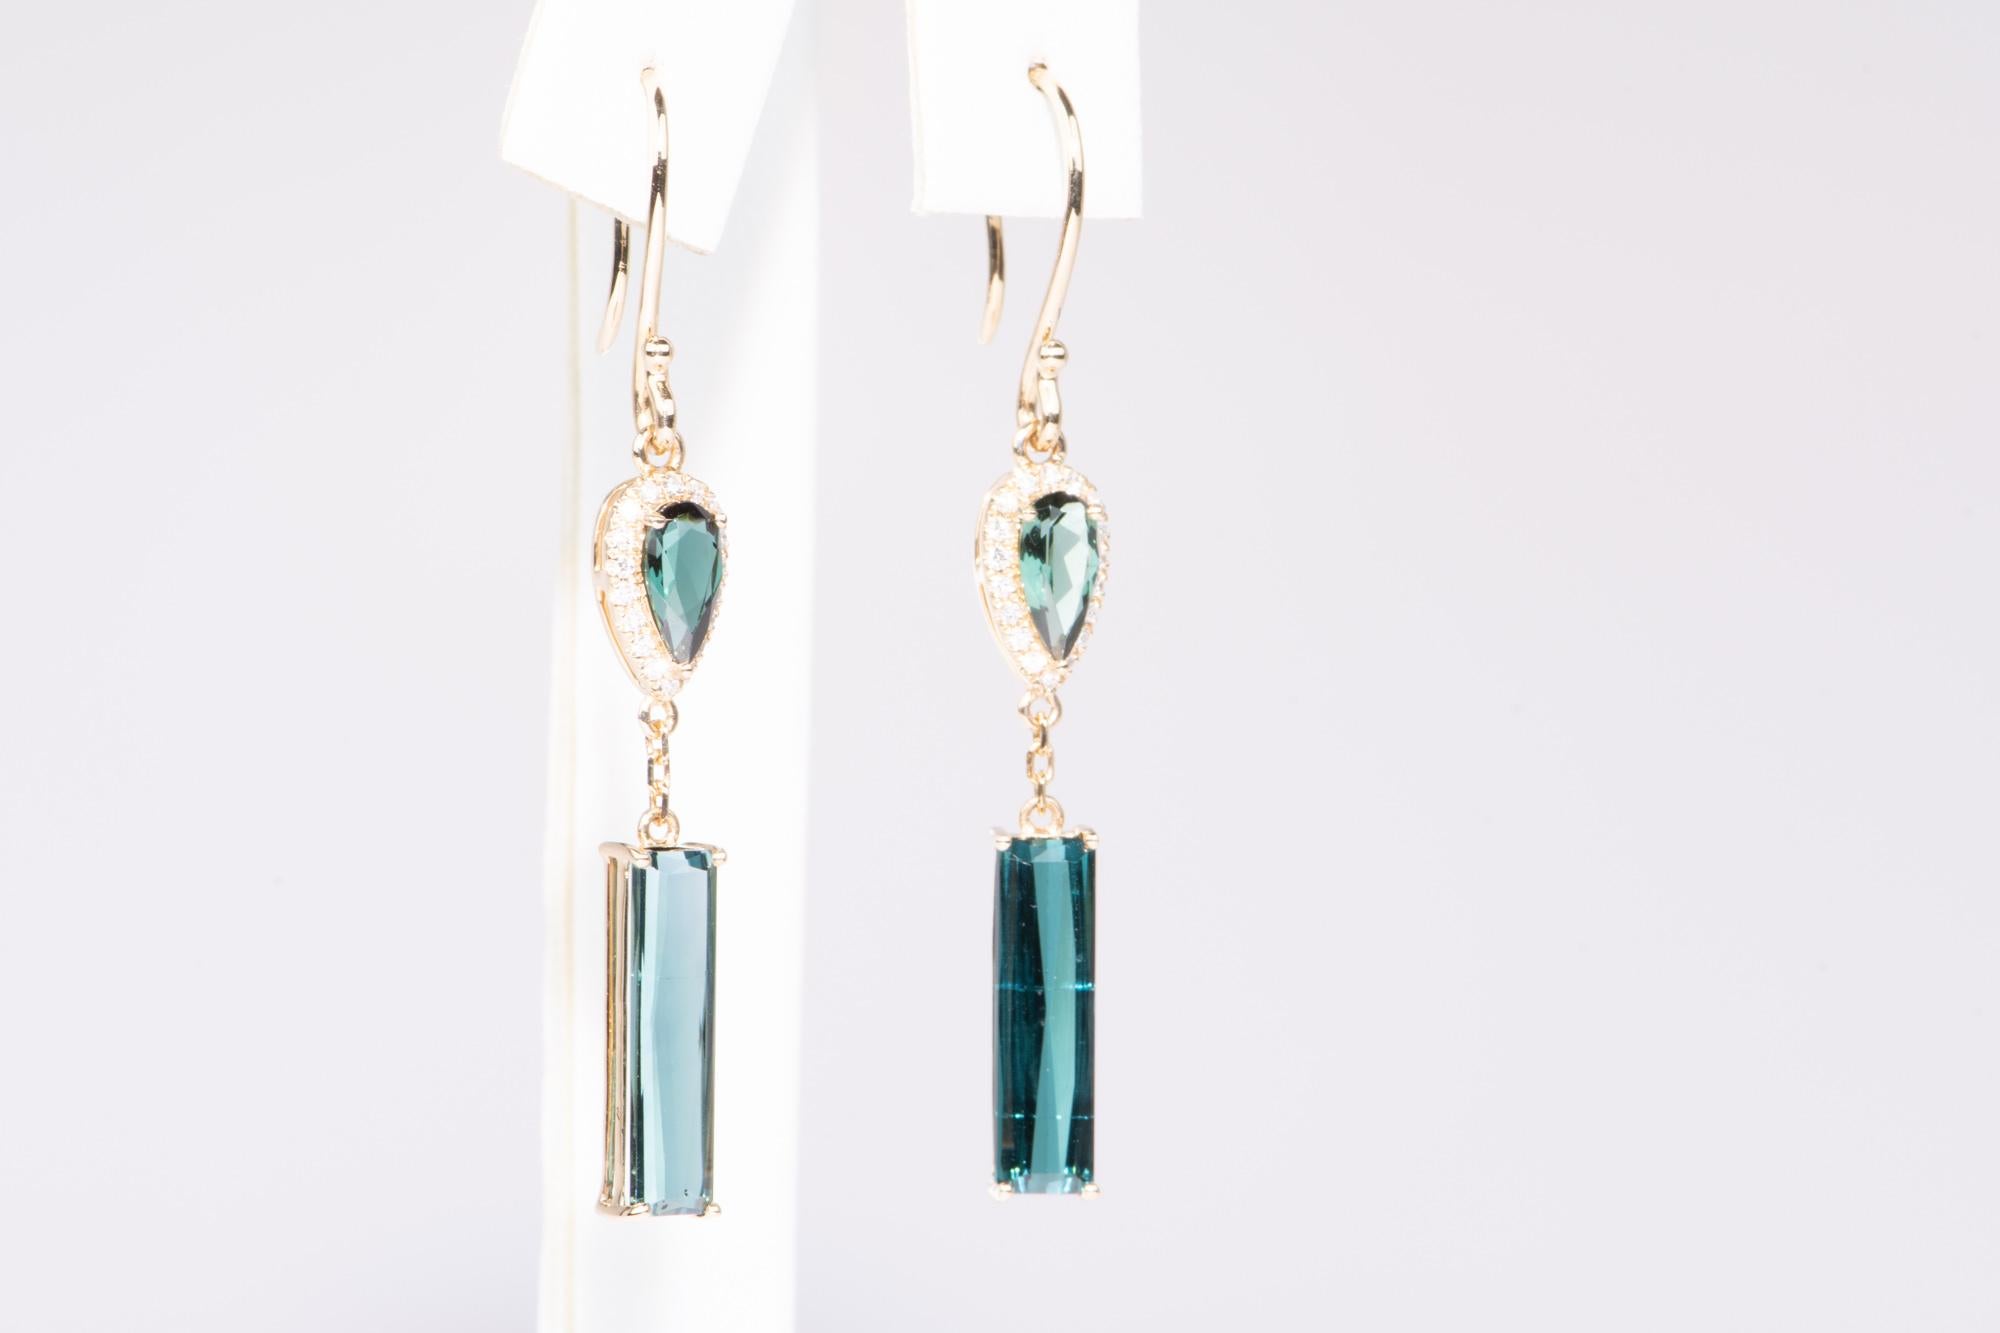 ♥ Indicolite Lagoon Tourmaline Long Earrings 14K Gold
♥ The design measures 35.3mm in length (North South direction), 5.6mm in width (East West direction), and sits 4.1mm tall.

♥  Material: 14K Gold
♥  Gemstone: Earth-mined tourmalines (4cts) and